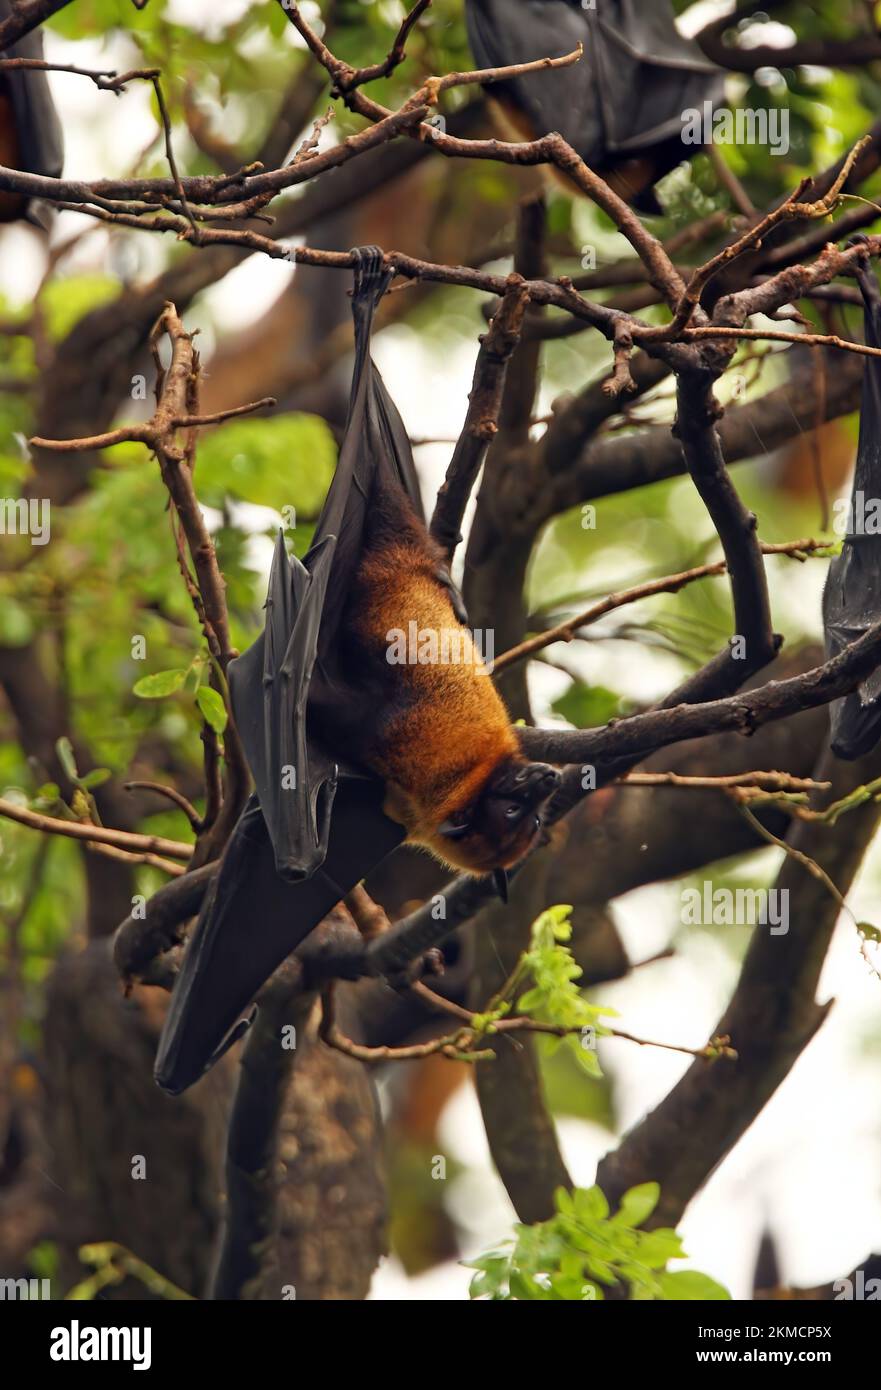 Indian Flying Fox (Pteropus giganteus) adults male at roost stretching  Sri Lanka            December Stock Photo